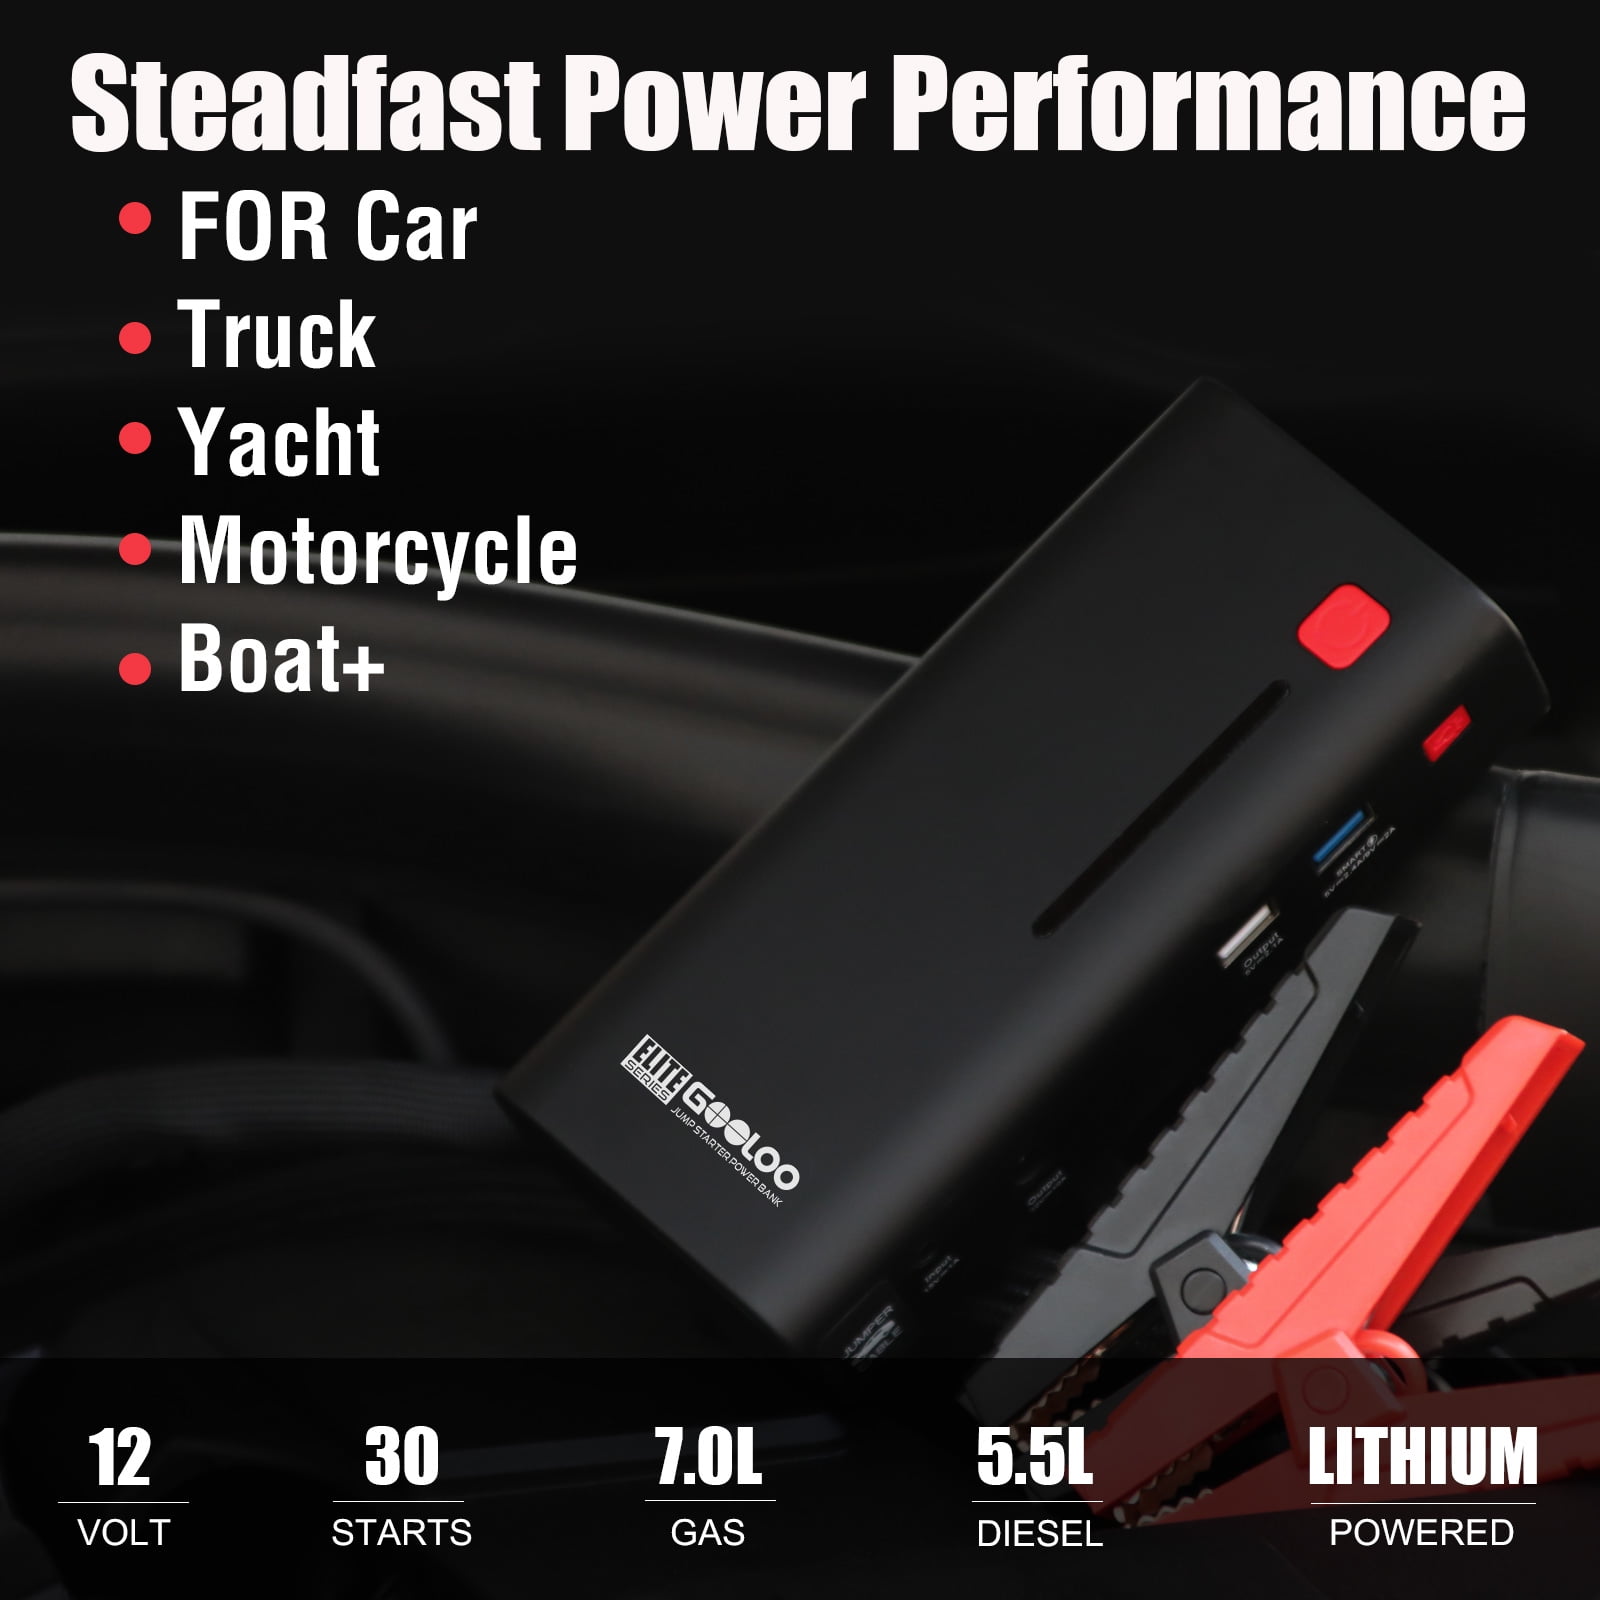 12V Portable Power Pack Auto Battery Booster Phone Charger Built-in LED Light,Gray GOOLOO 1200A Peak 18000mAh SuperSafe Car Jump Starter with USB Quick Charge Up to 7.0L Gas or 5.5L Diesel Engine 